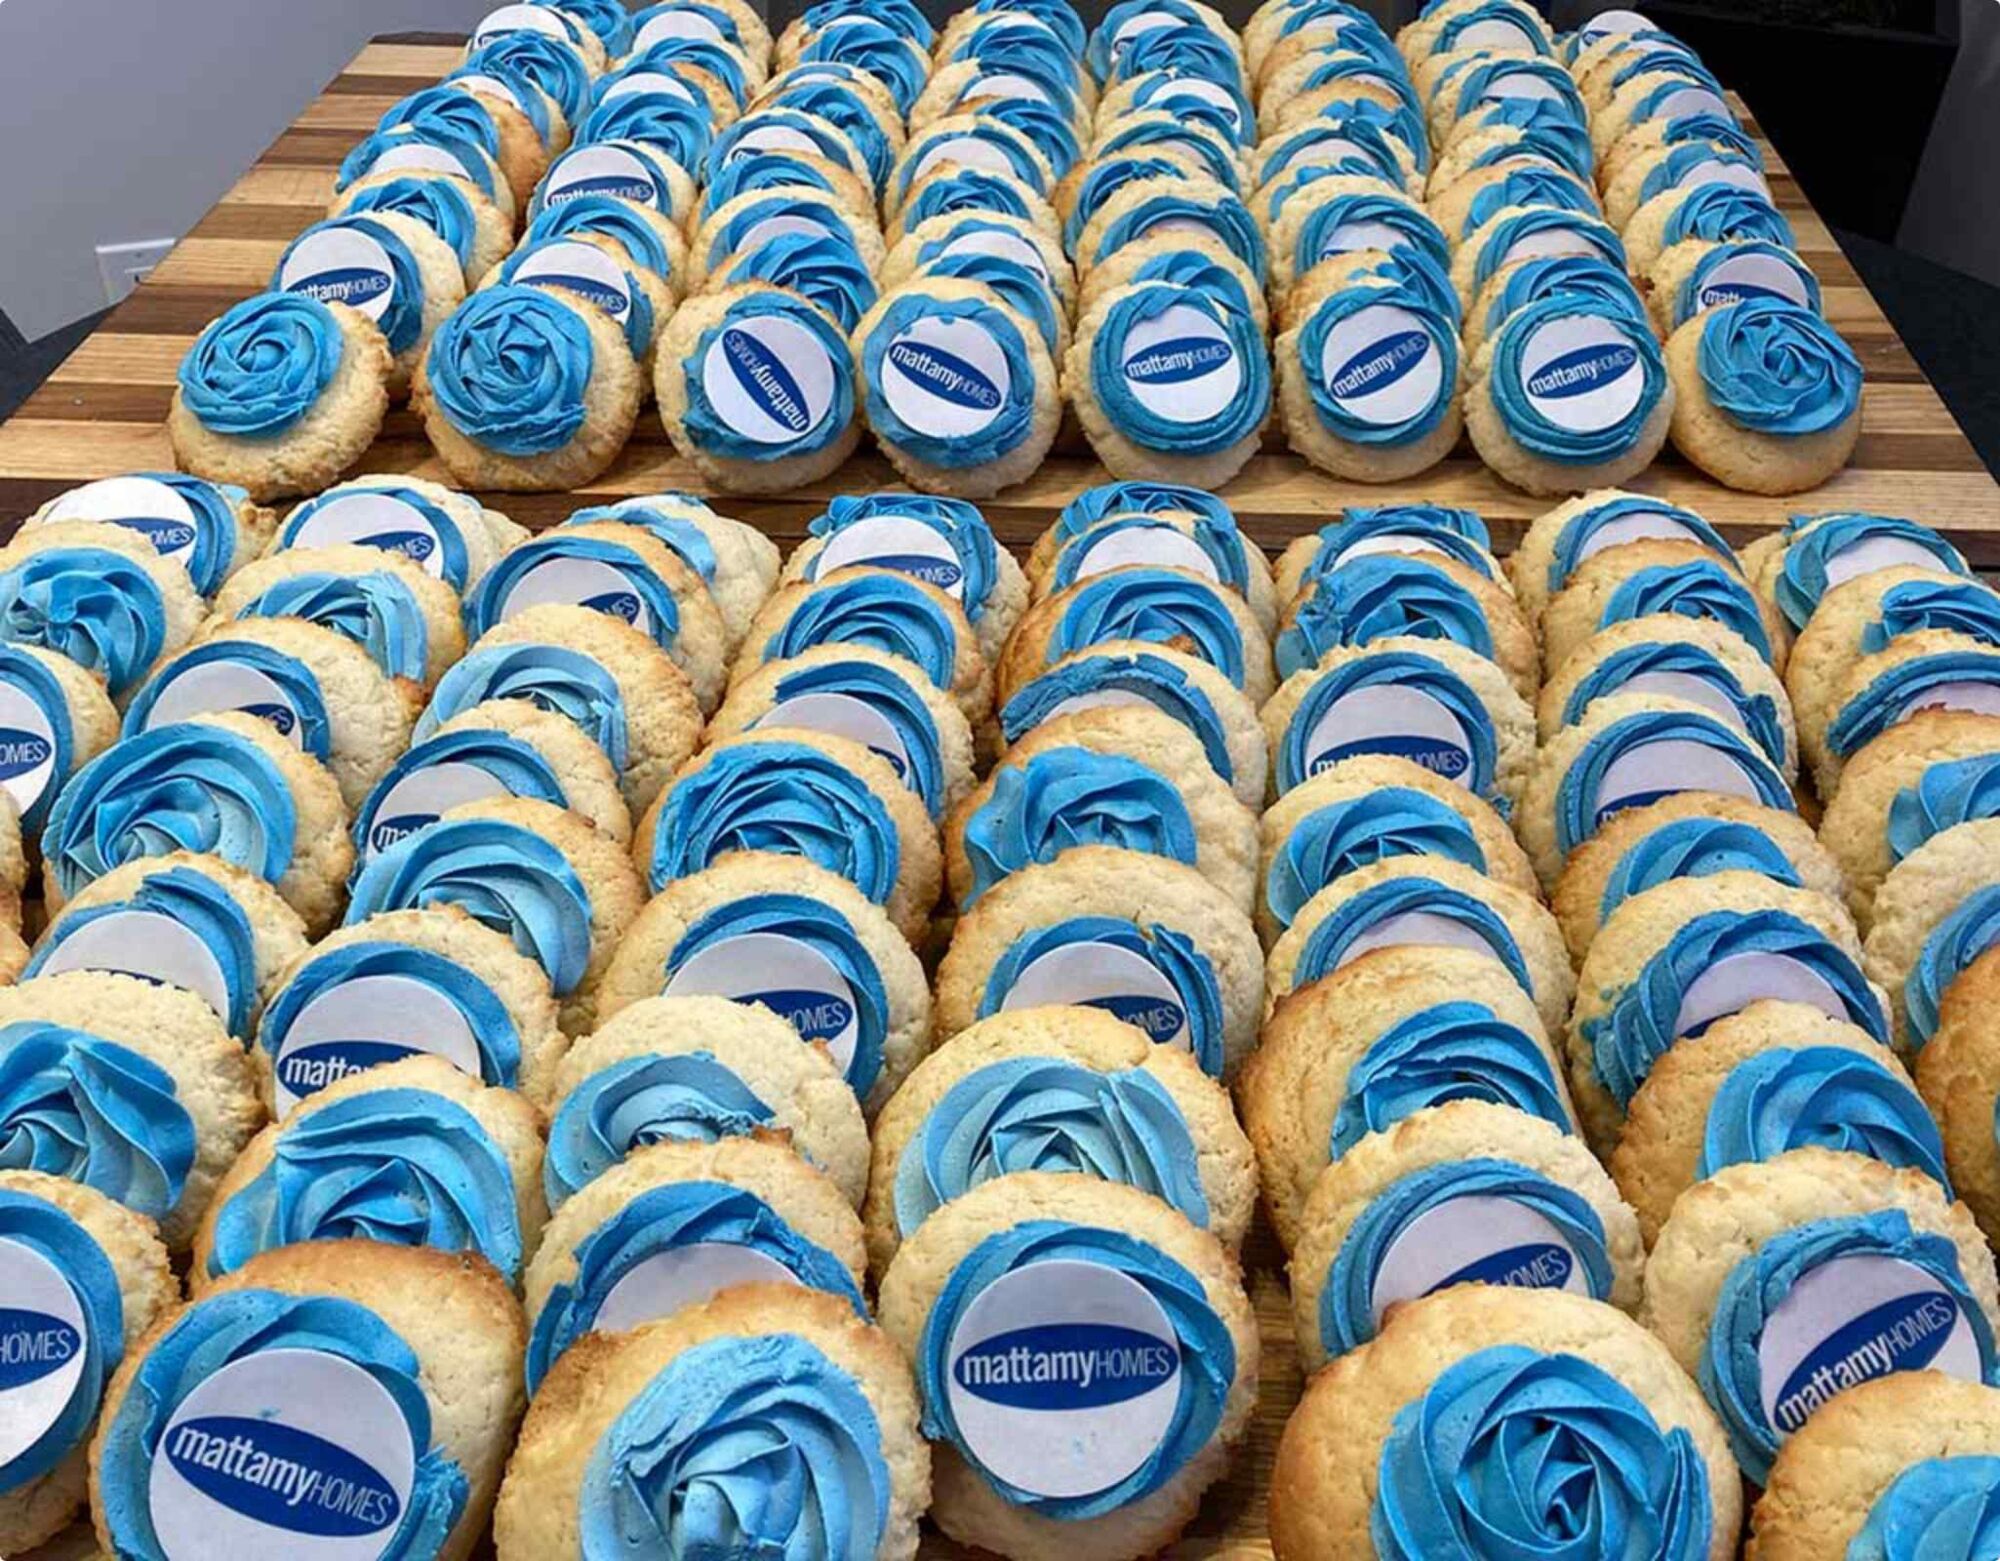 Several rows of cookies with the the blue Mattamy Homes logo on them with icing behind it.